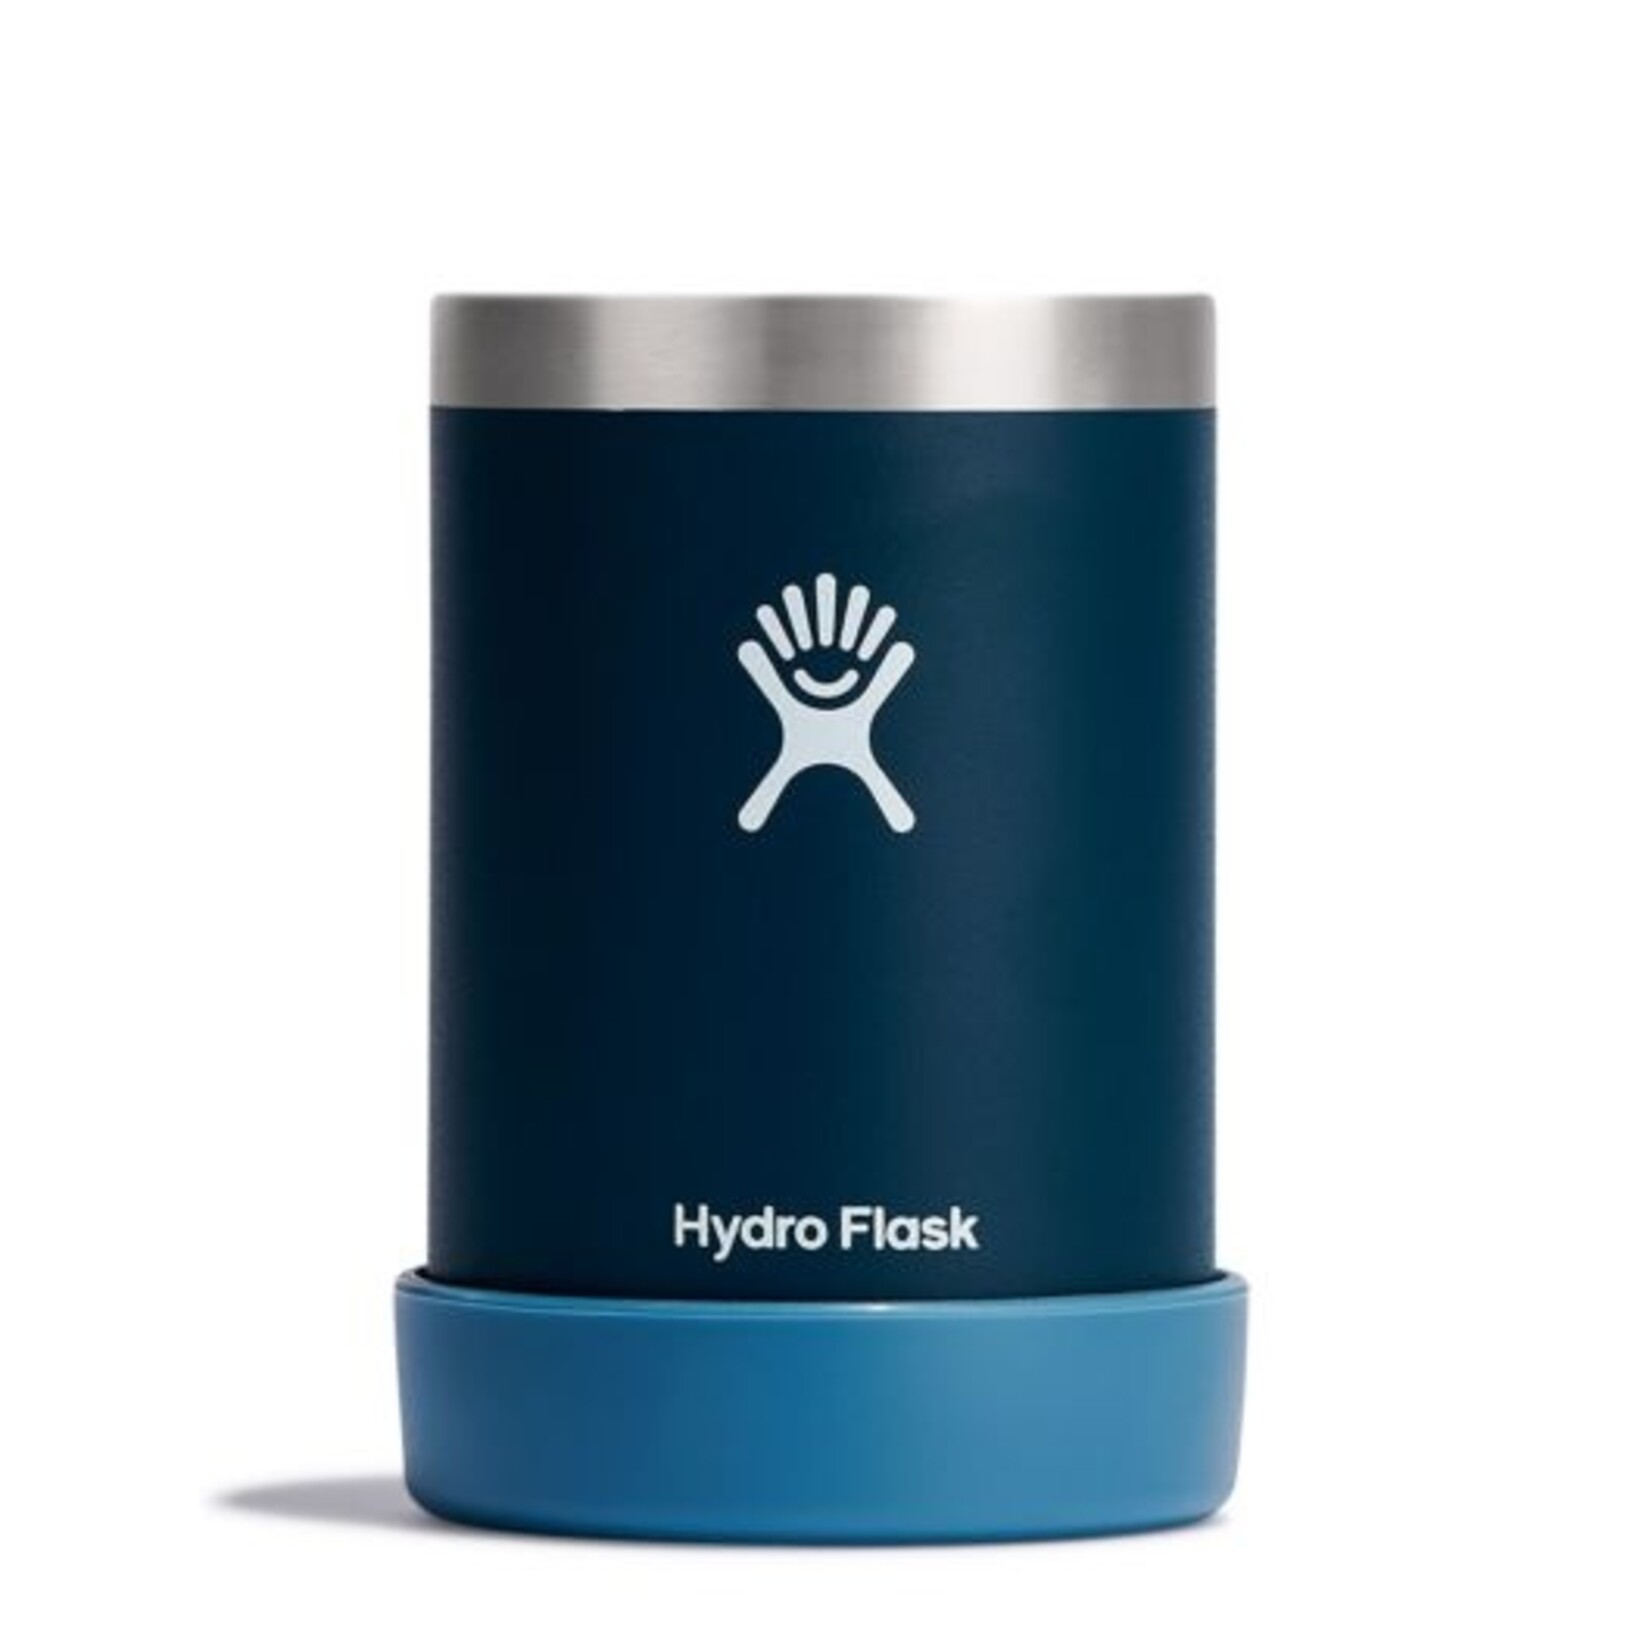 Hydro Flask 12 oz Cooler cup